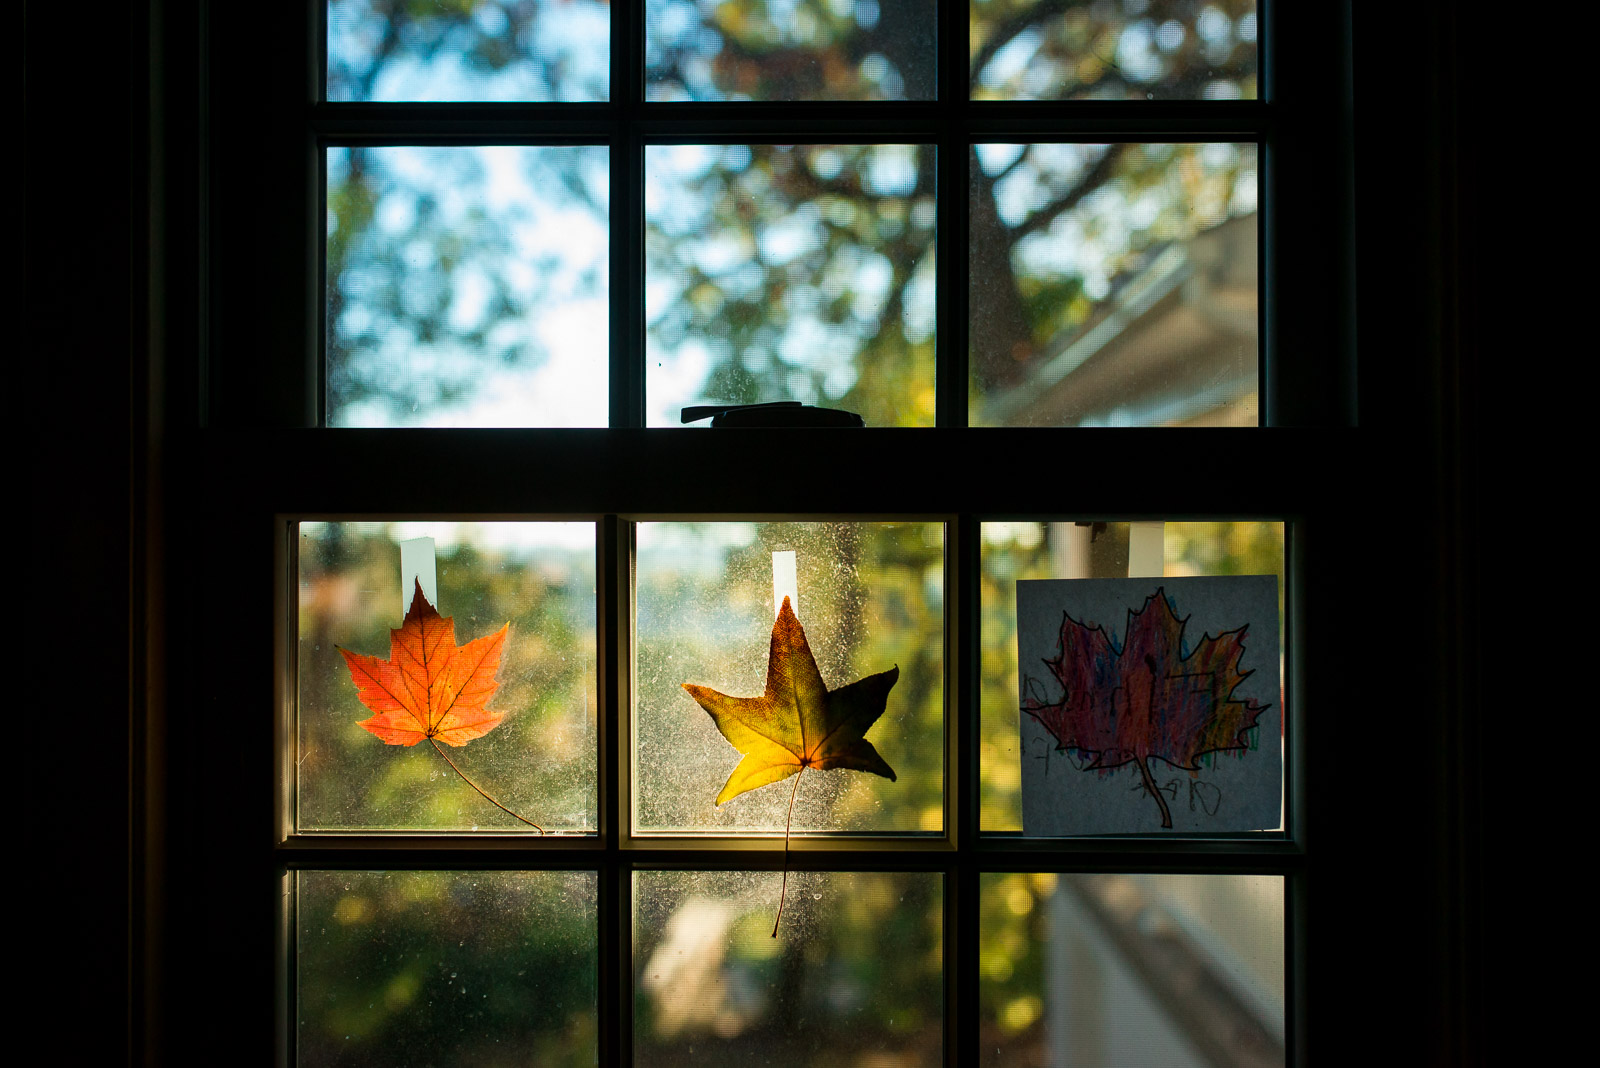 A storytelling still life image is a naturally occurring scene or object that tells a story and contains no people. I enjoy photographing storytelling still life photos all over my home, but my favorite spot is the kitchen window above the sink.